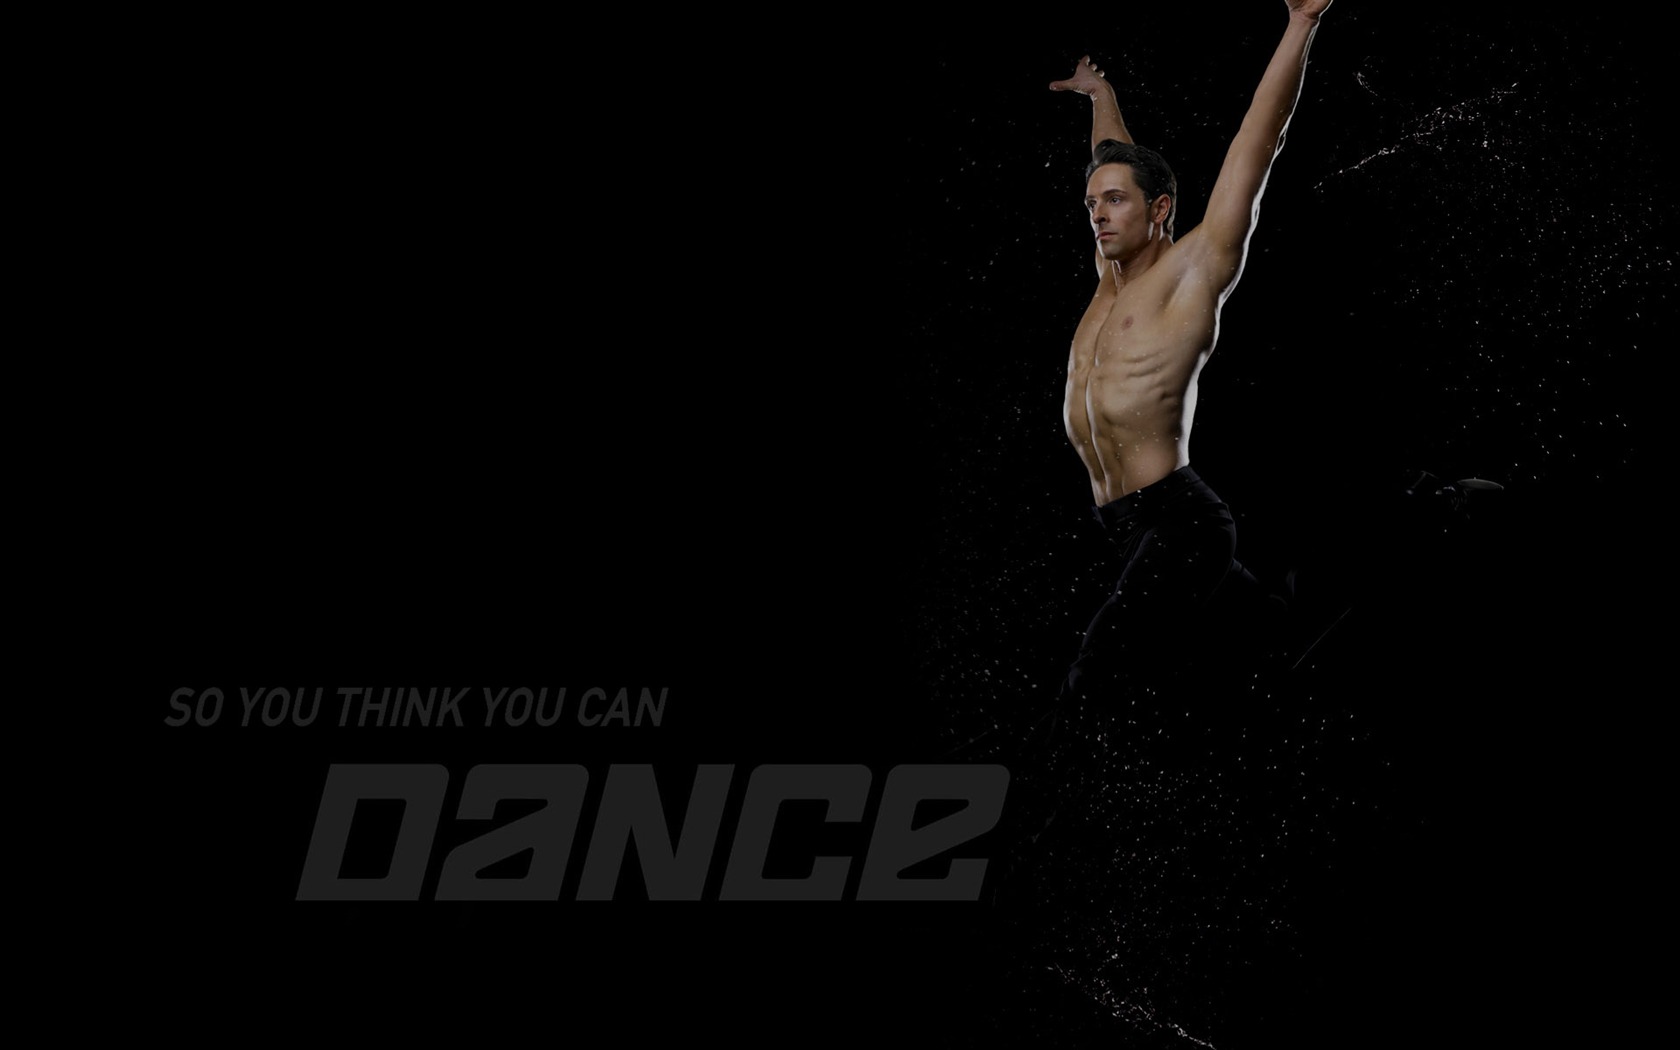 So You Think You Can Dance 舞林争霸 壁纸(二)10 - 1680x1050